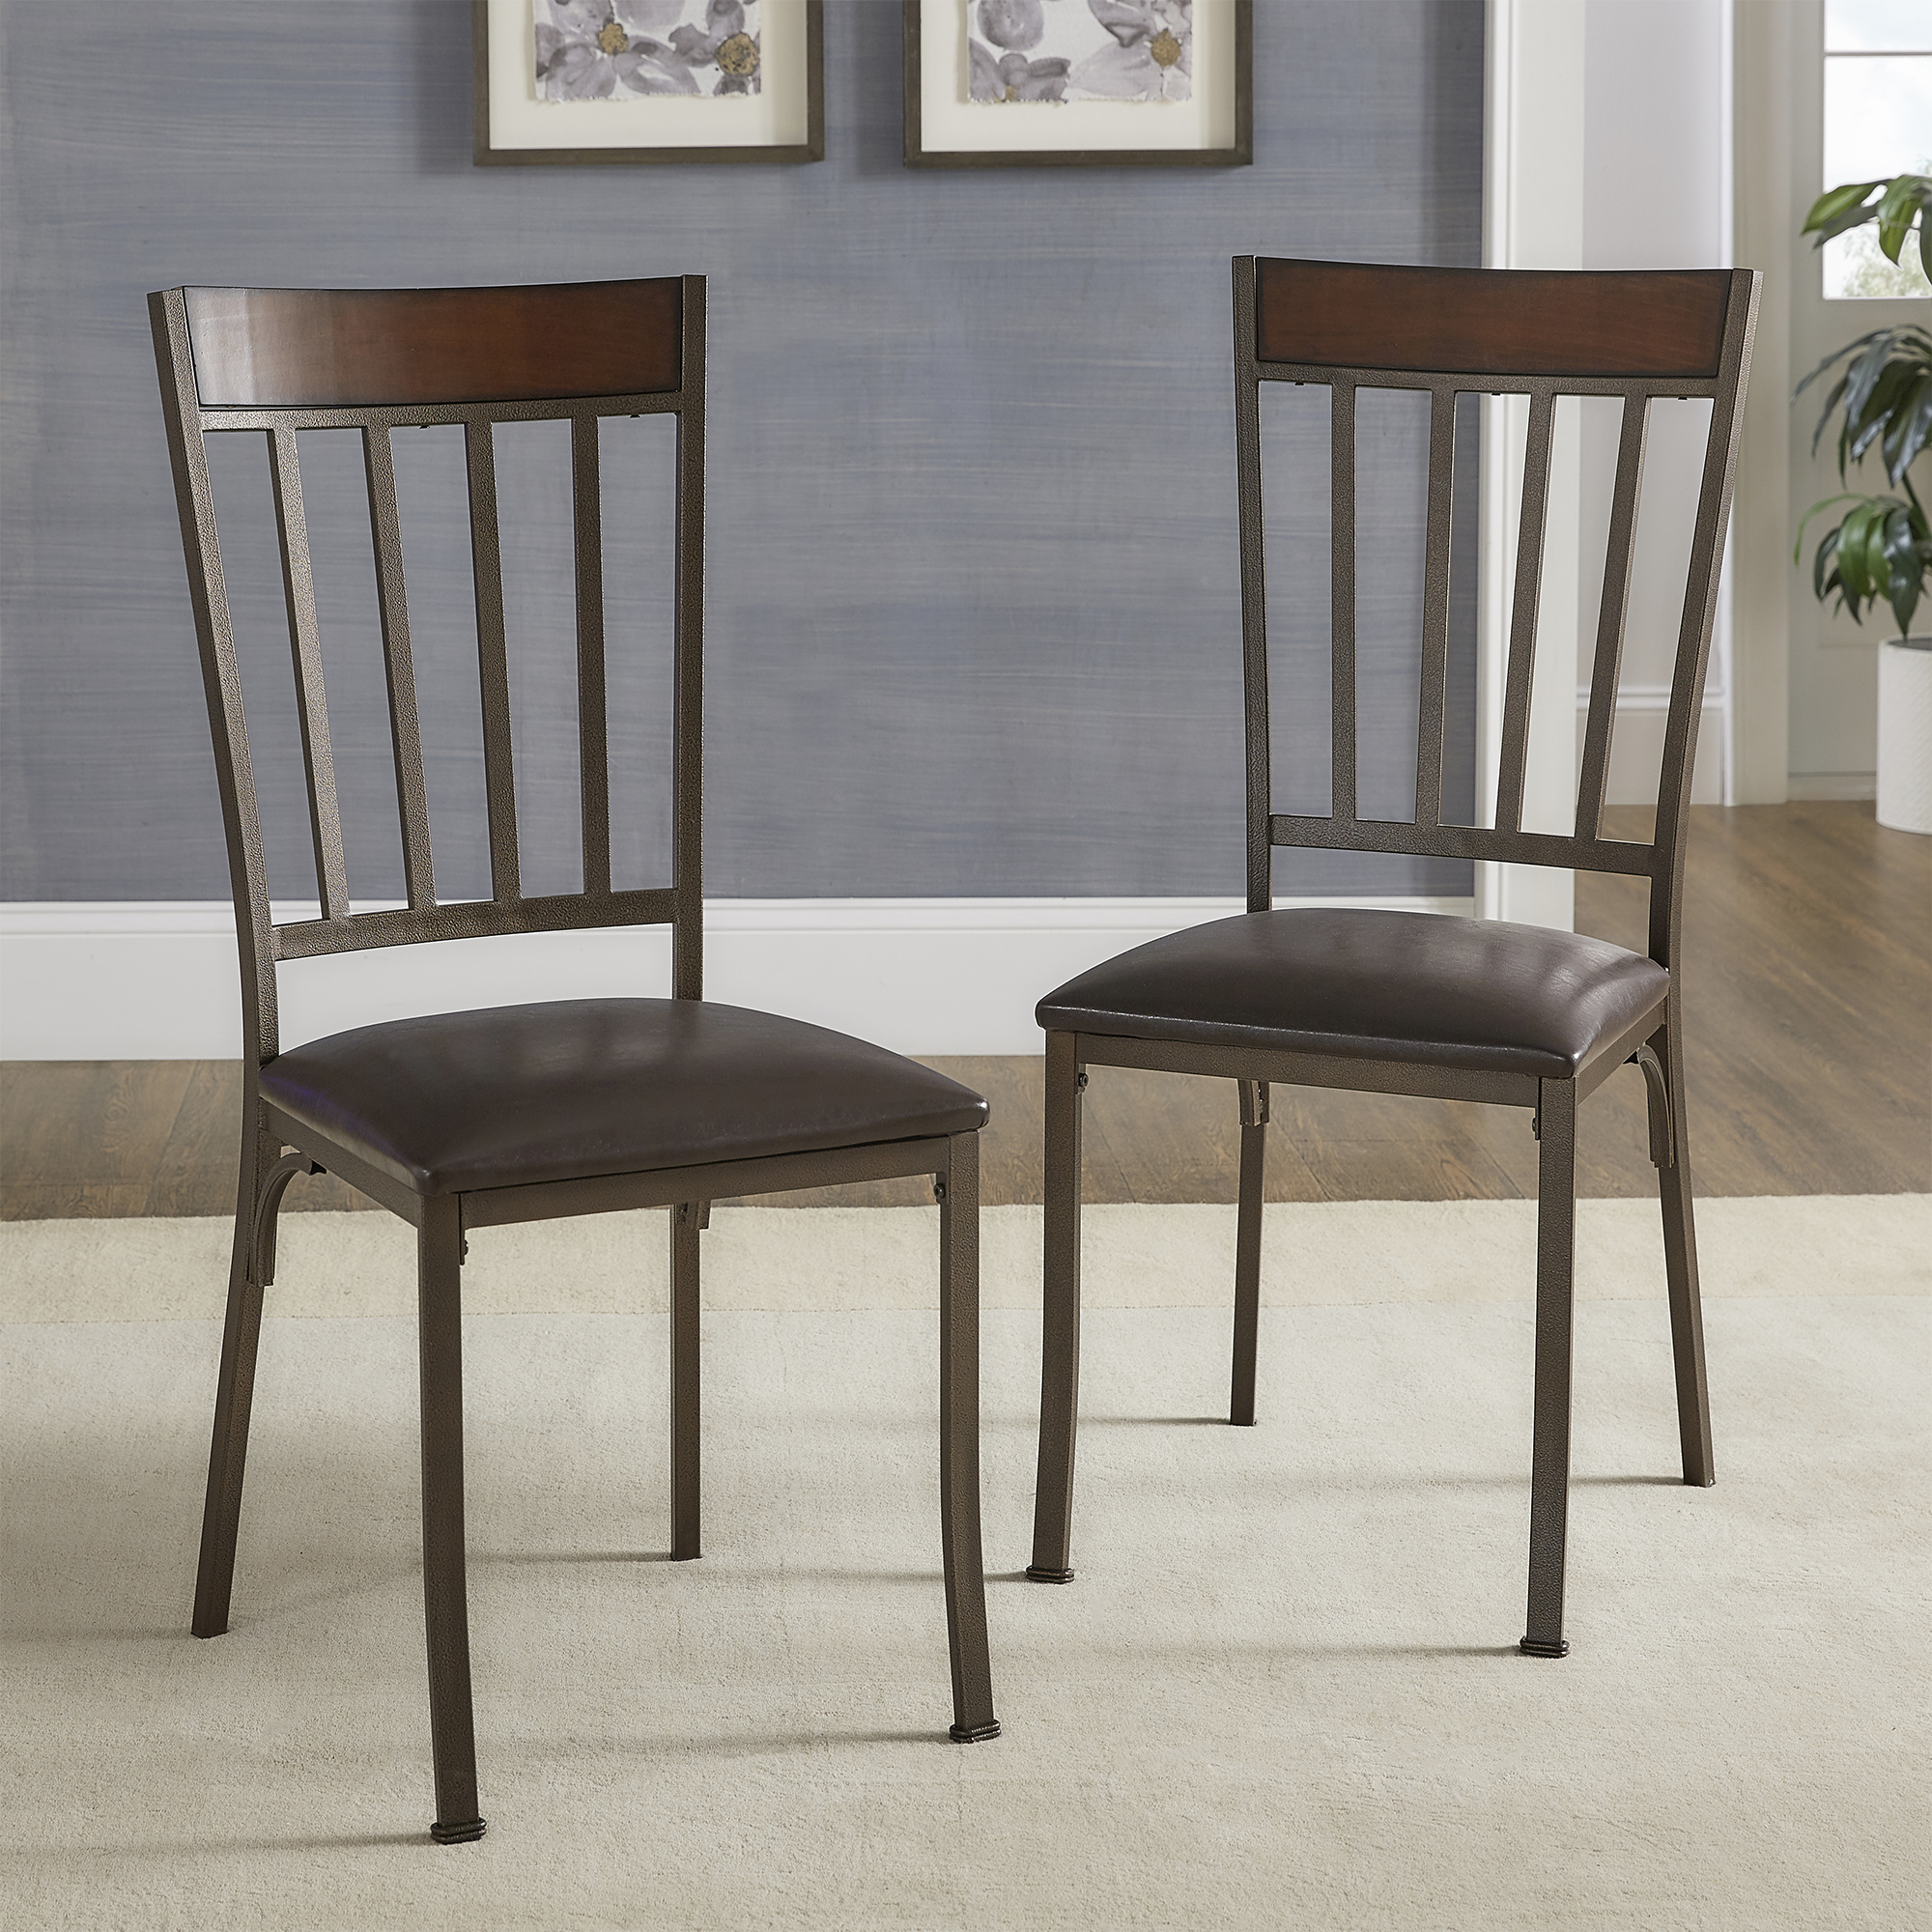 Antique Bronze Finish Dining Chairs (Set of 2)